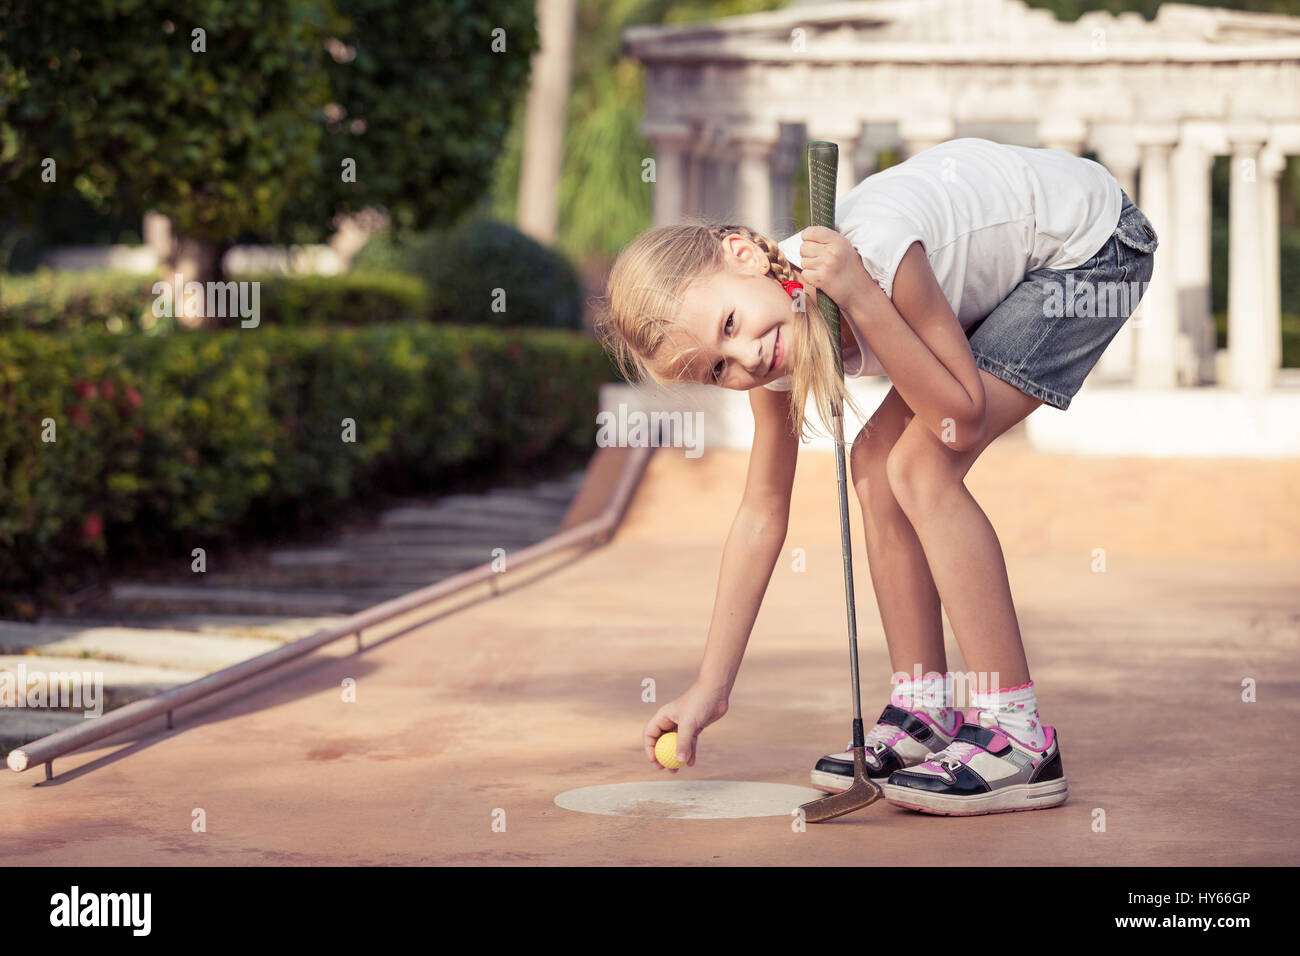 Little girl swinging mini golf club at the day time Stock Photo